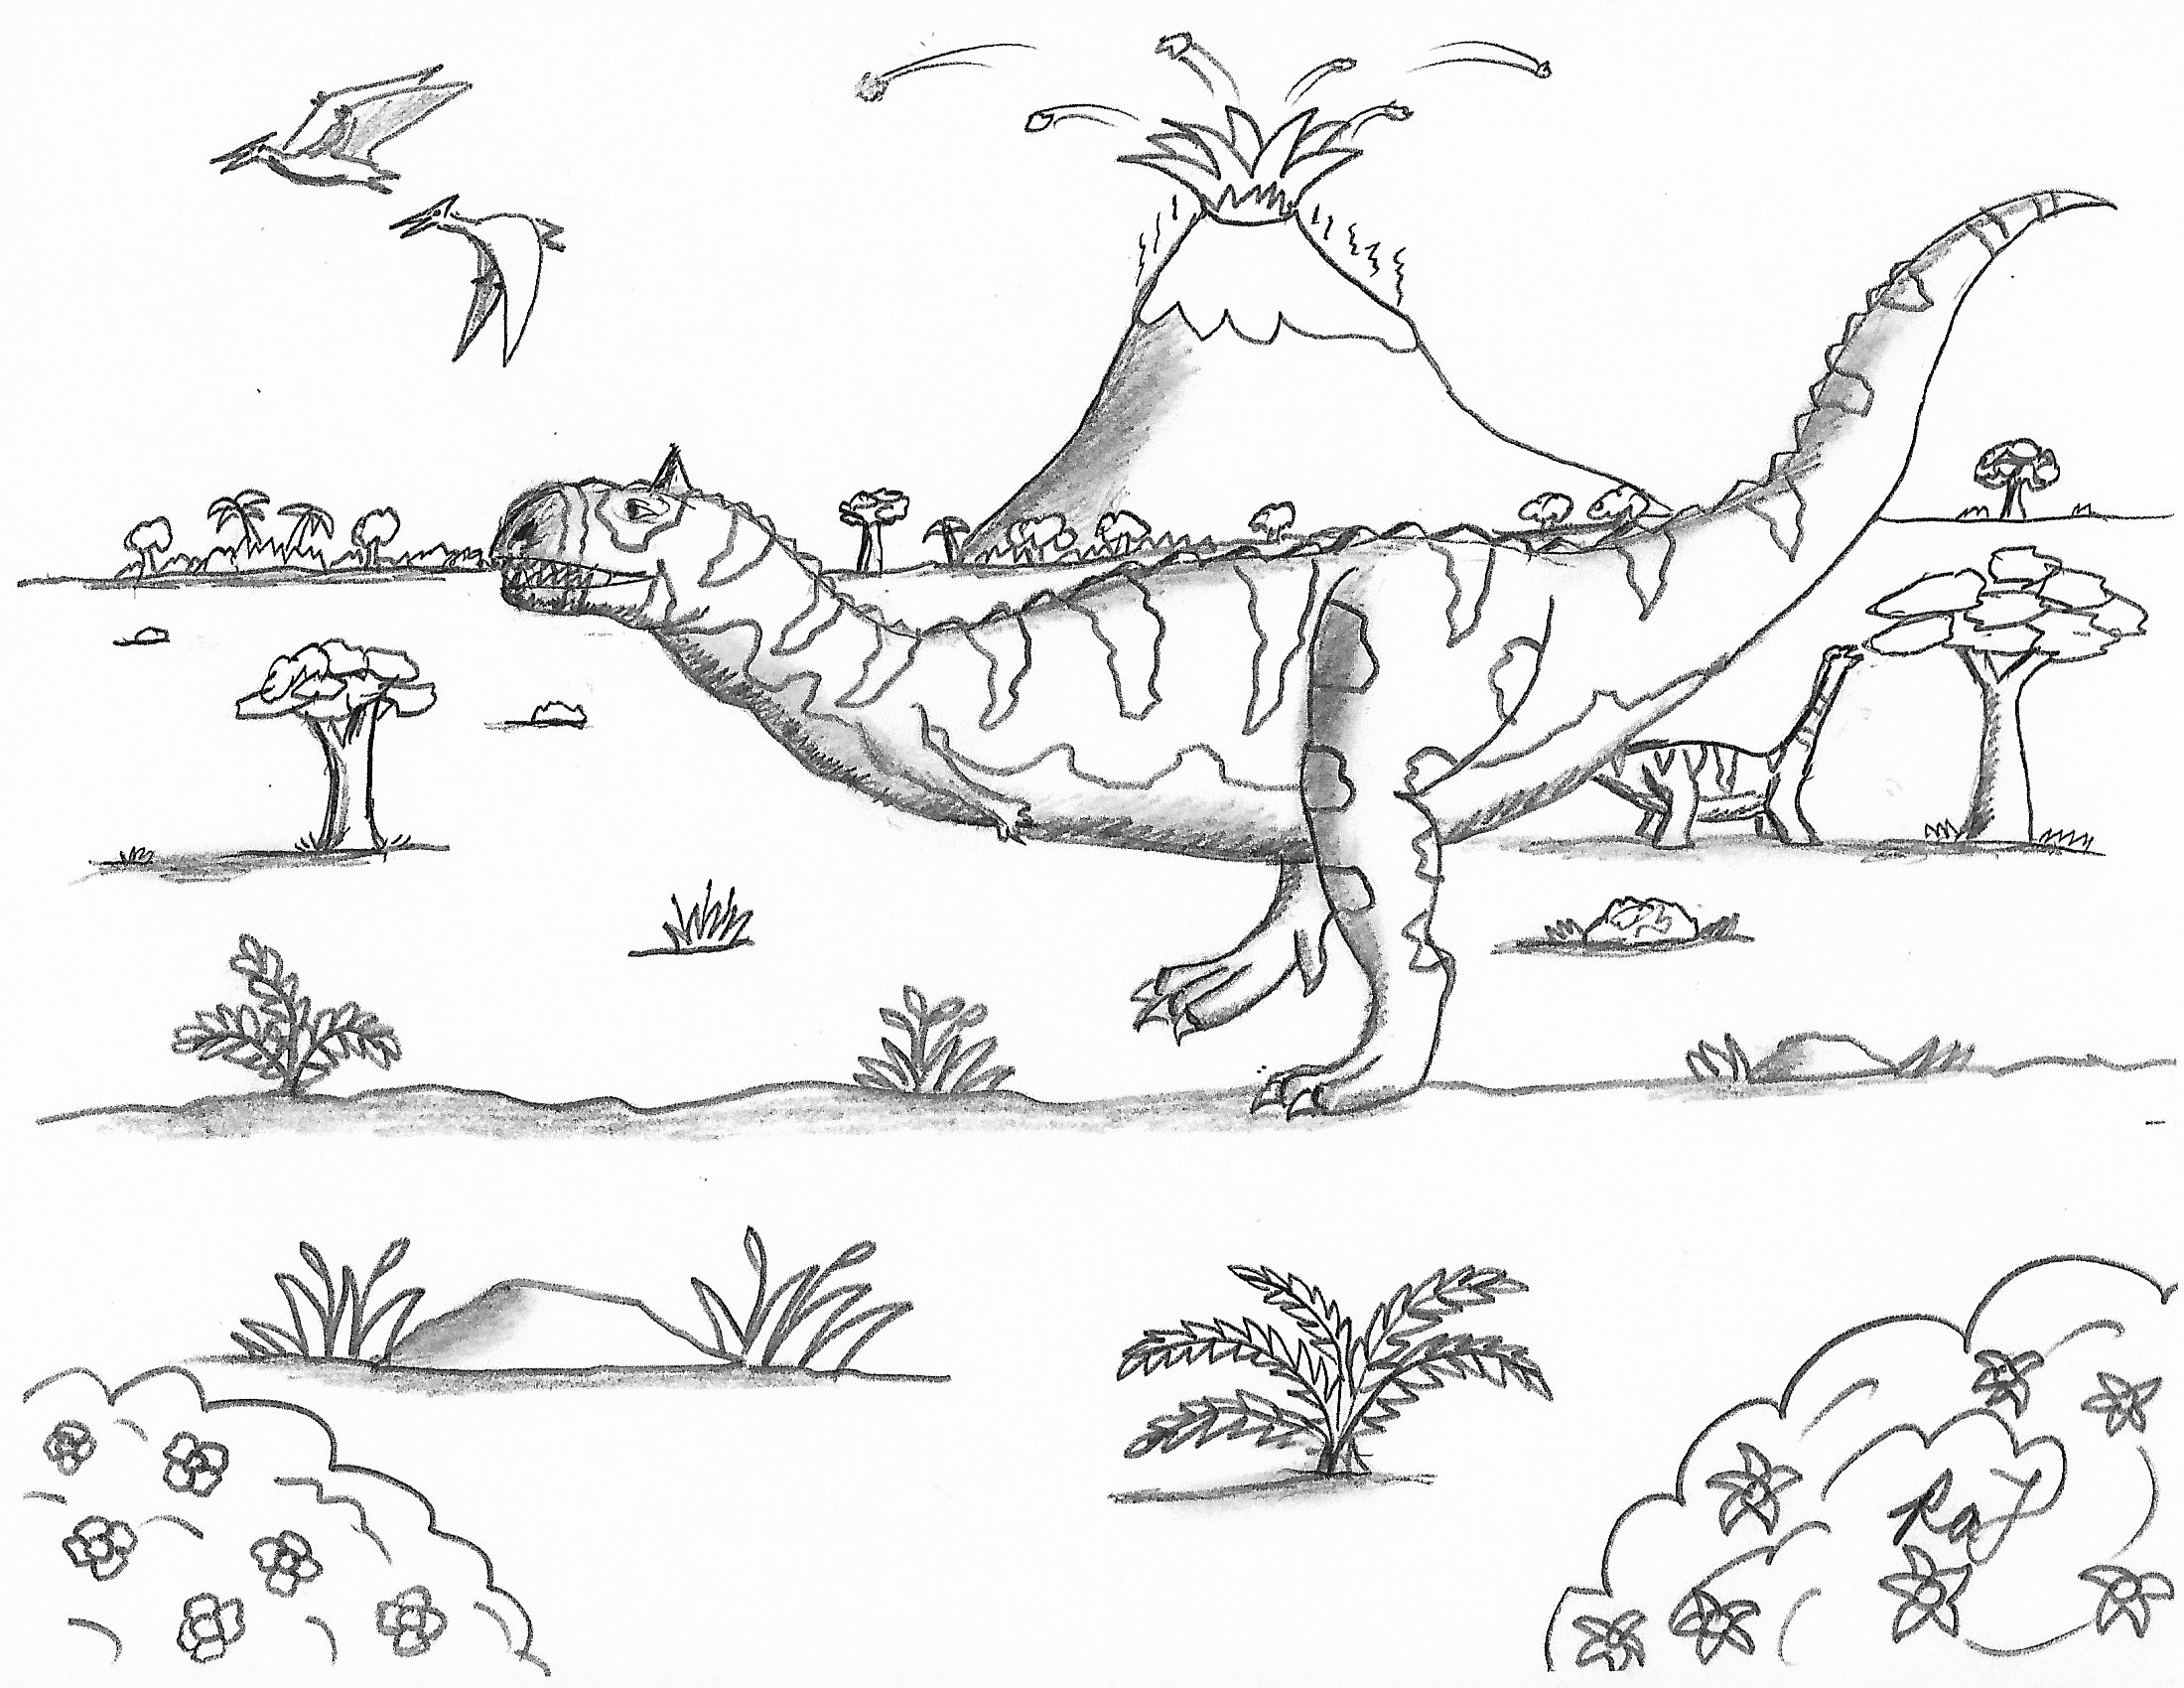 Robin's Great Coloring Pages: Majungasaurus near a Volcano and ...